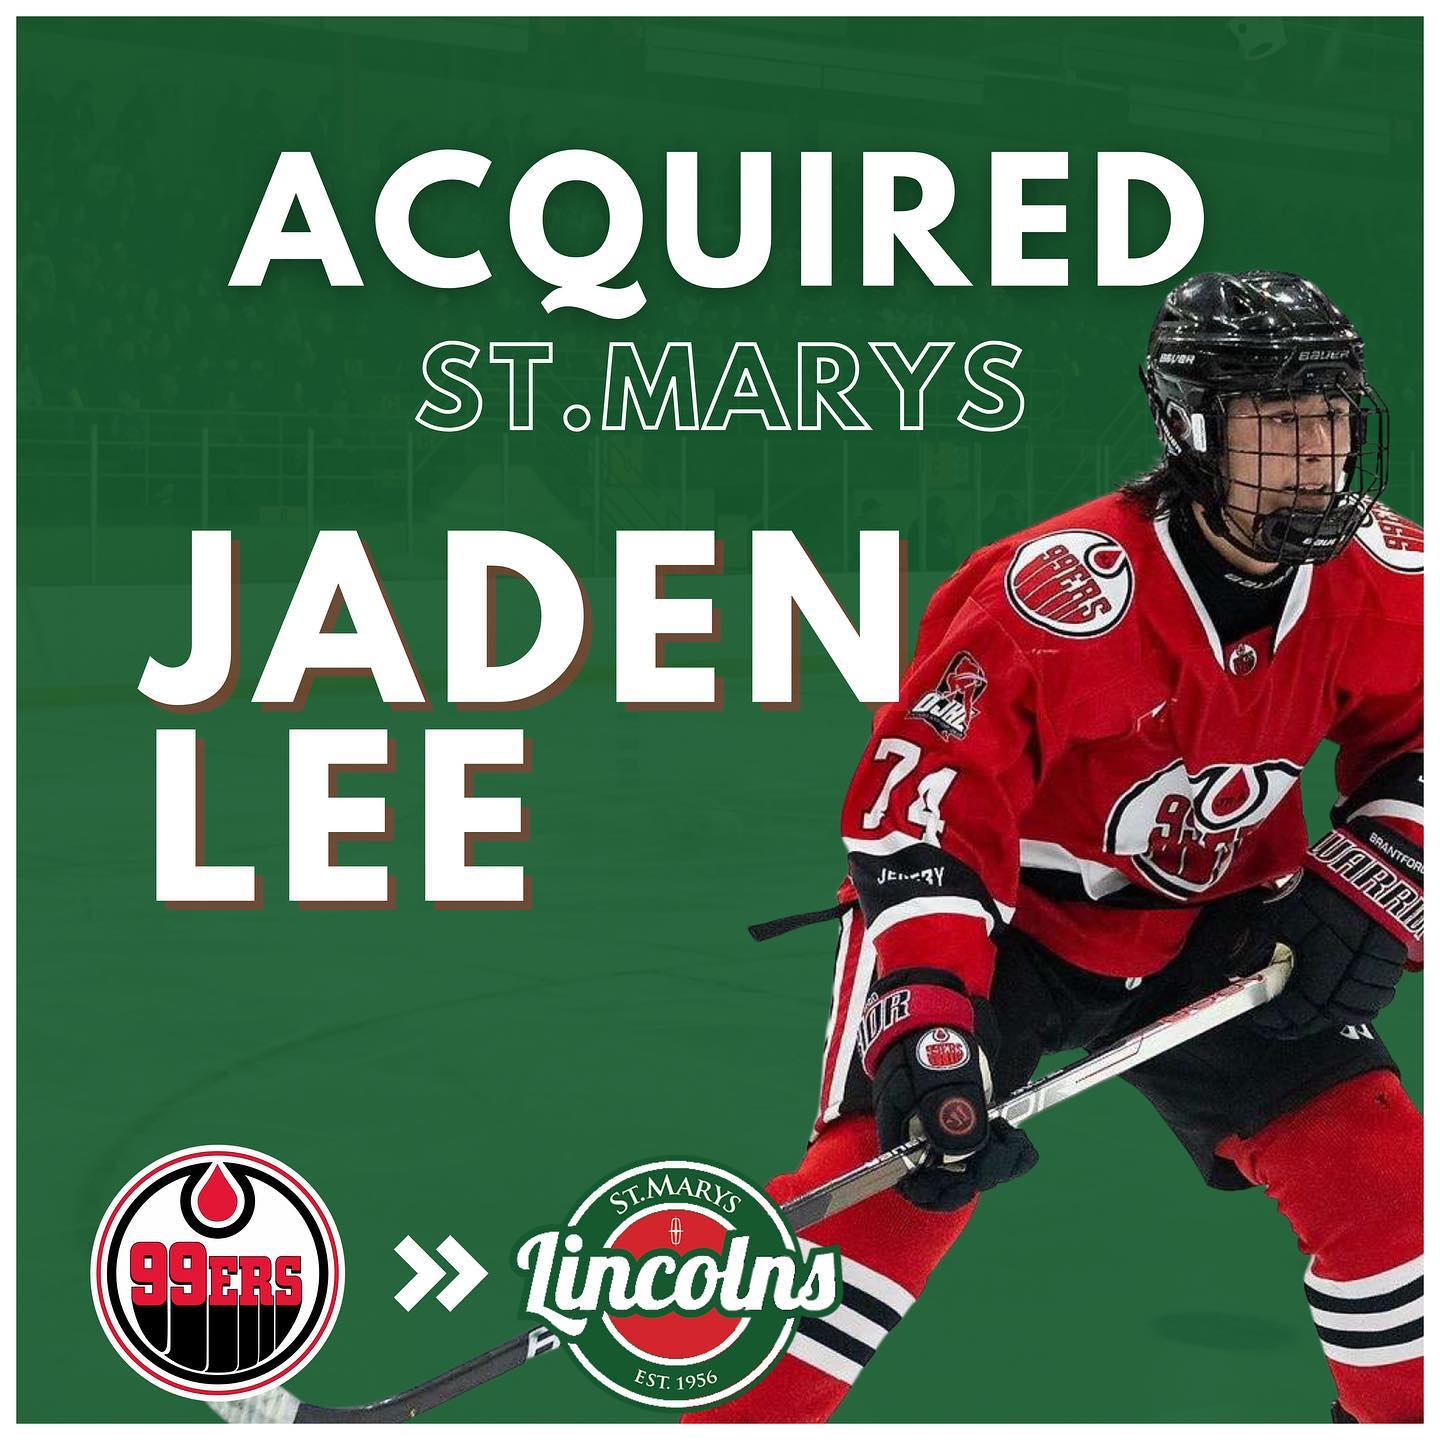 ACQUIRED - Lincs have landed FWD Jaden Lee from the Brantford 99ers of the OJHL! Lee posted 31 points this past year for the 99ers and is a big addition to the squad #WeAreLincolns